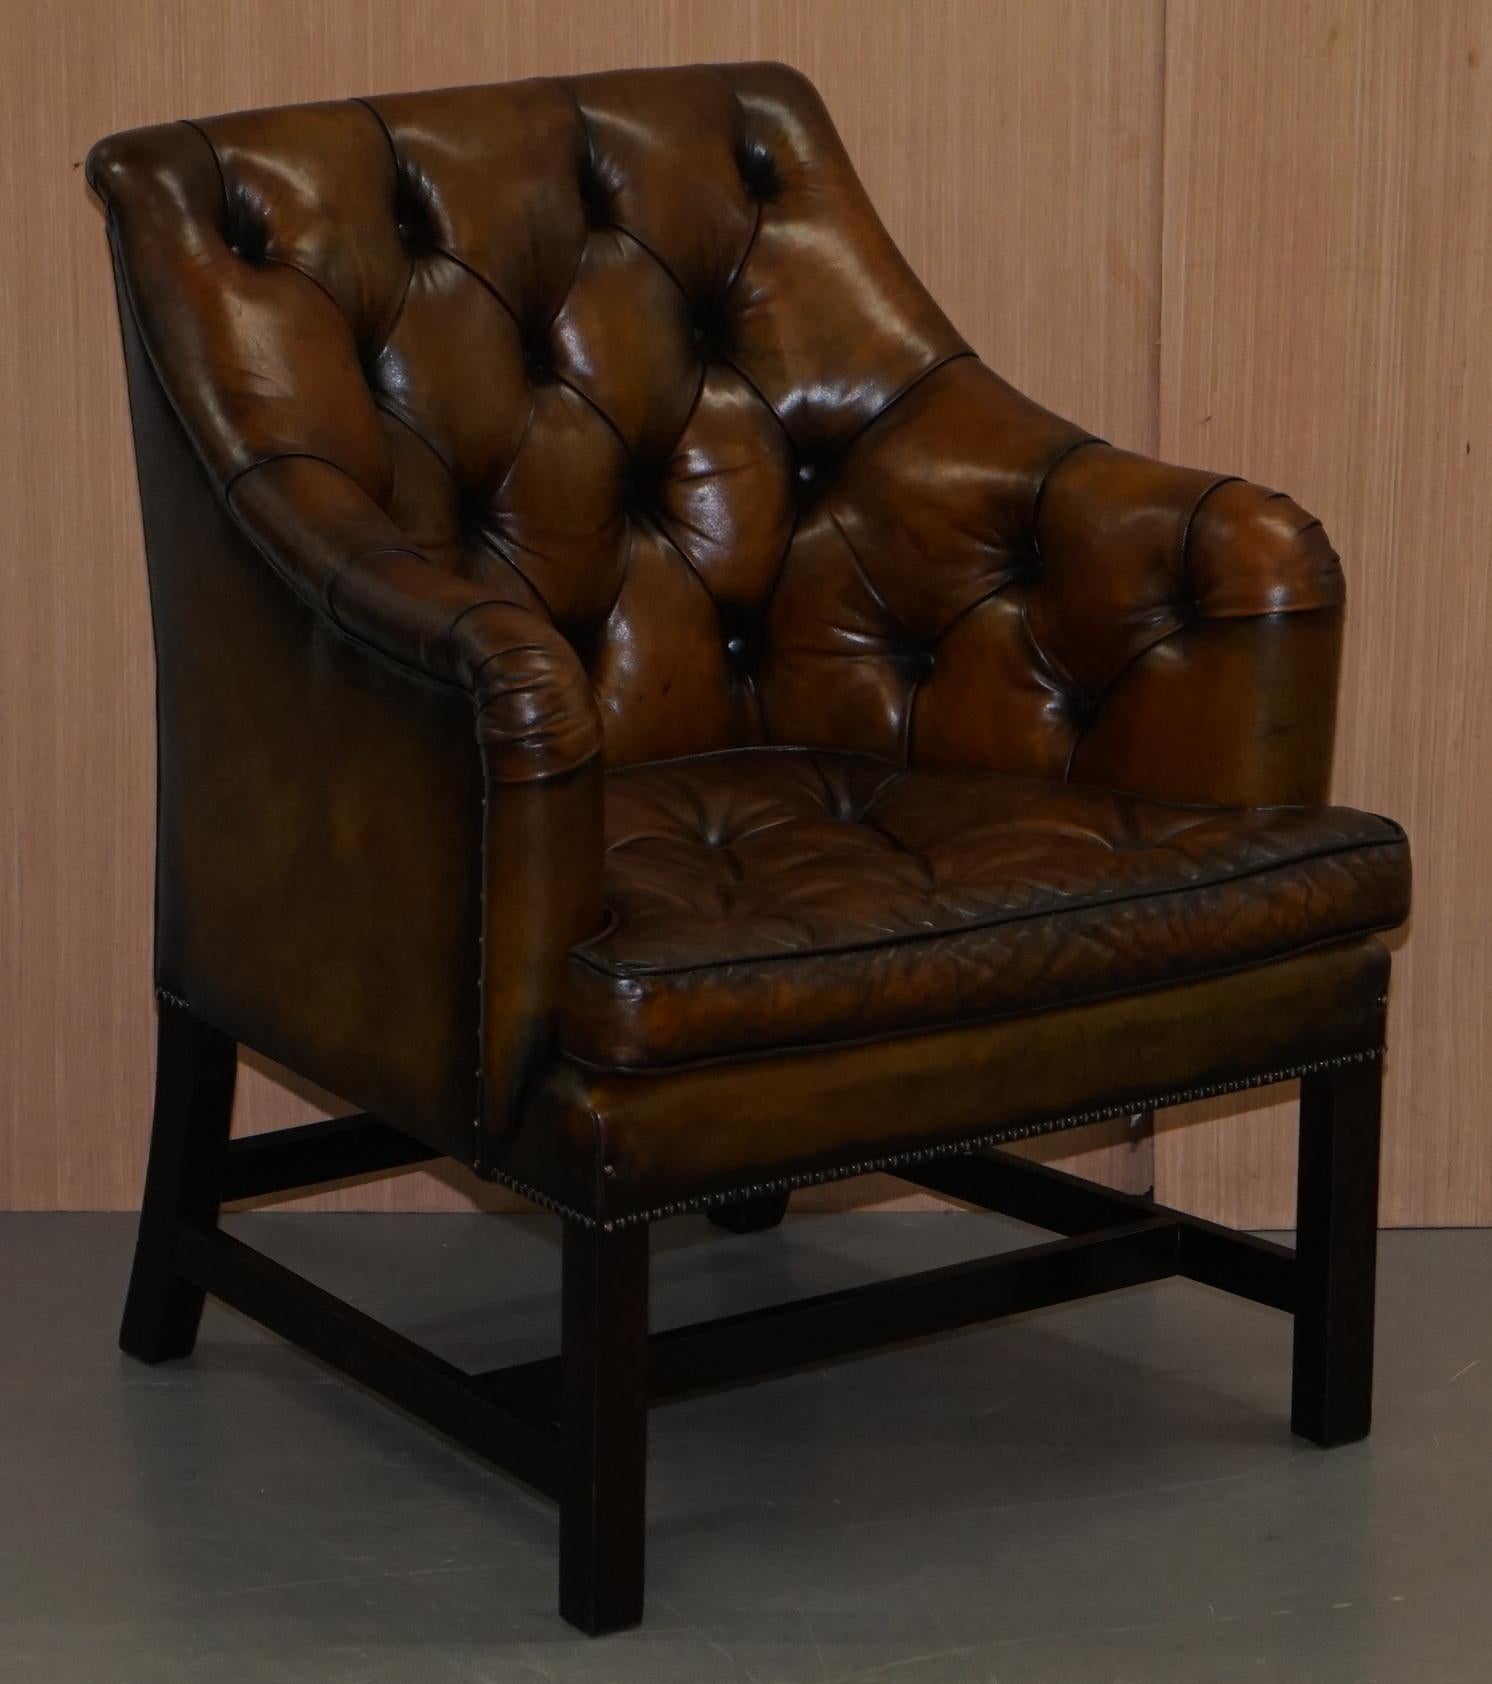 We are delighted to offer for sale this stunning pair of fully restored George Smith Whiskey brown Georgian style Occasional or desk armchairs RRP £10,400 for the pair

I have five of these armchairs, two pairs and one single armchair, all other